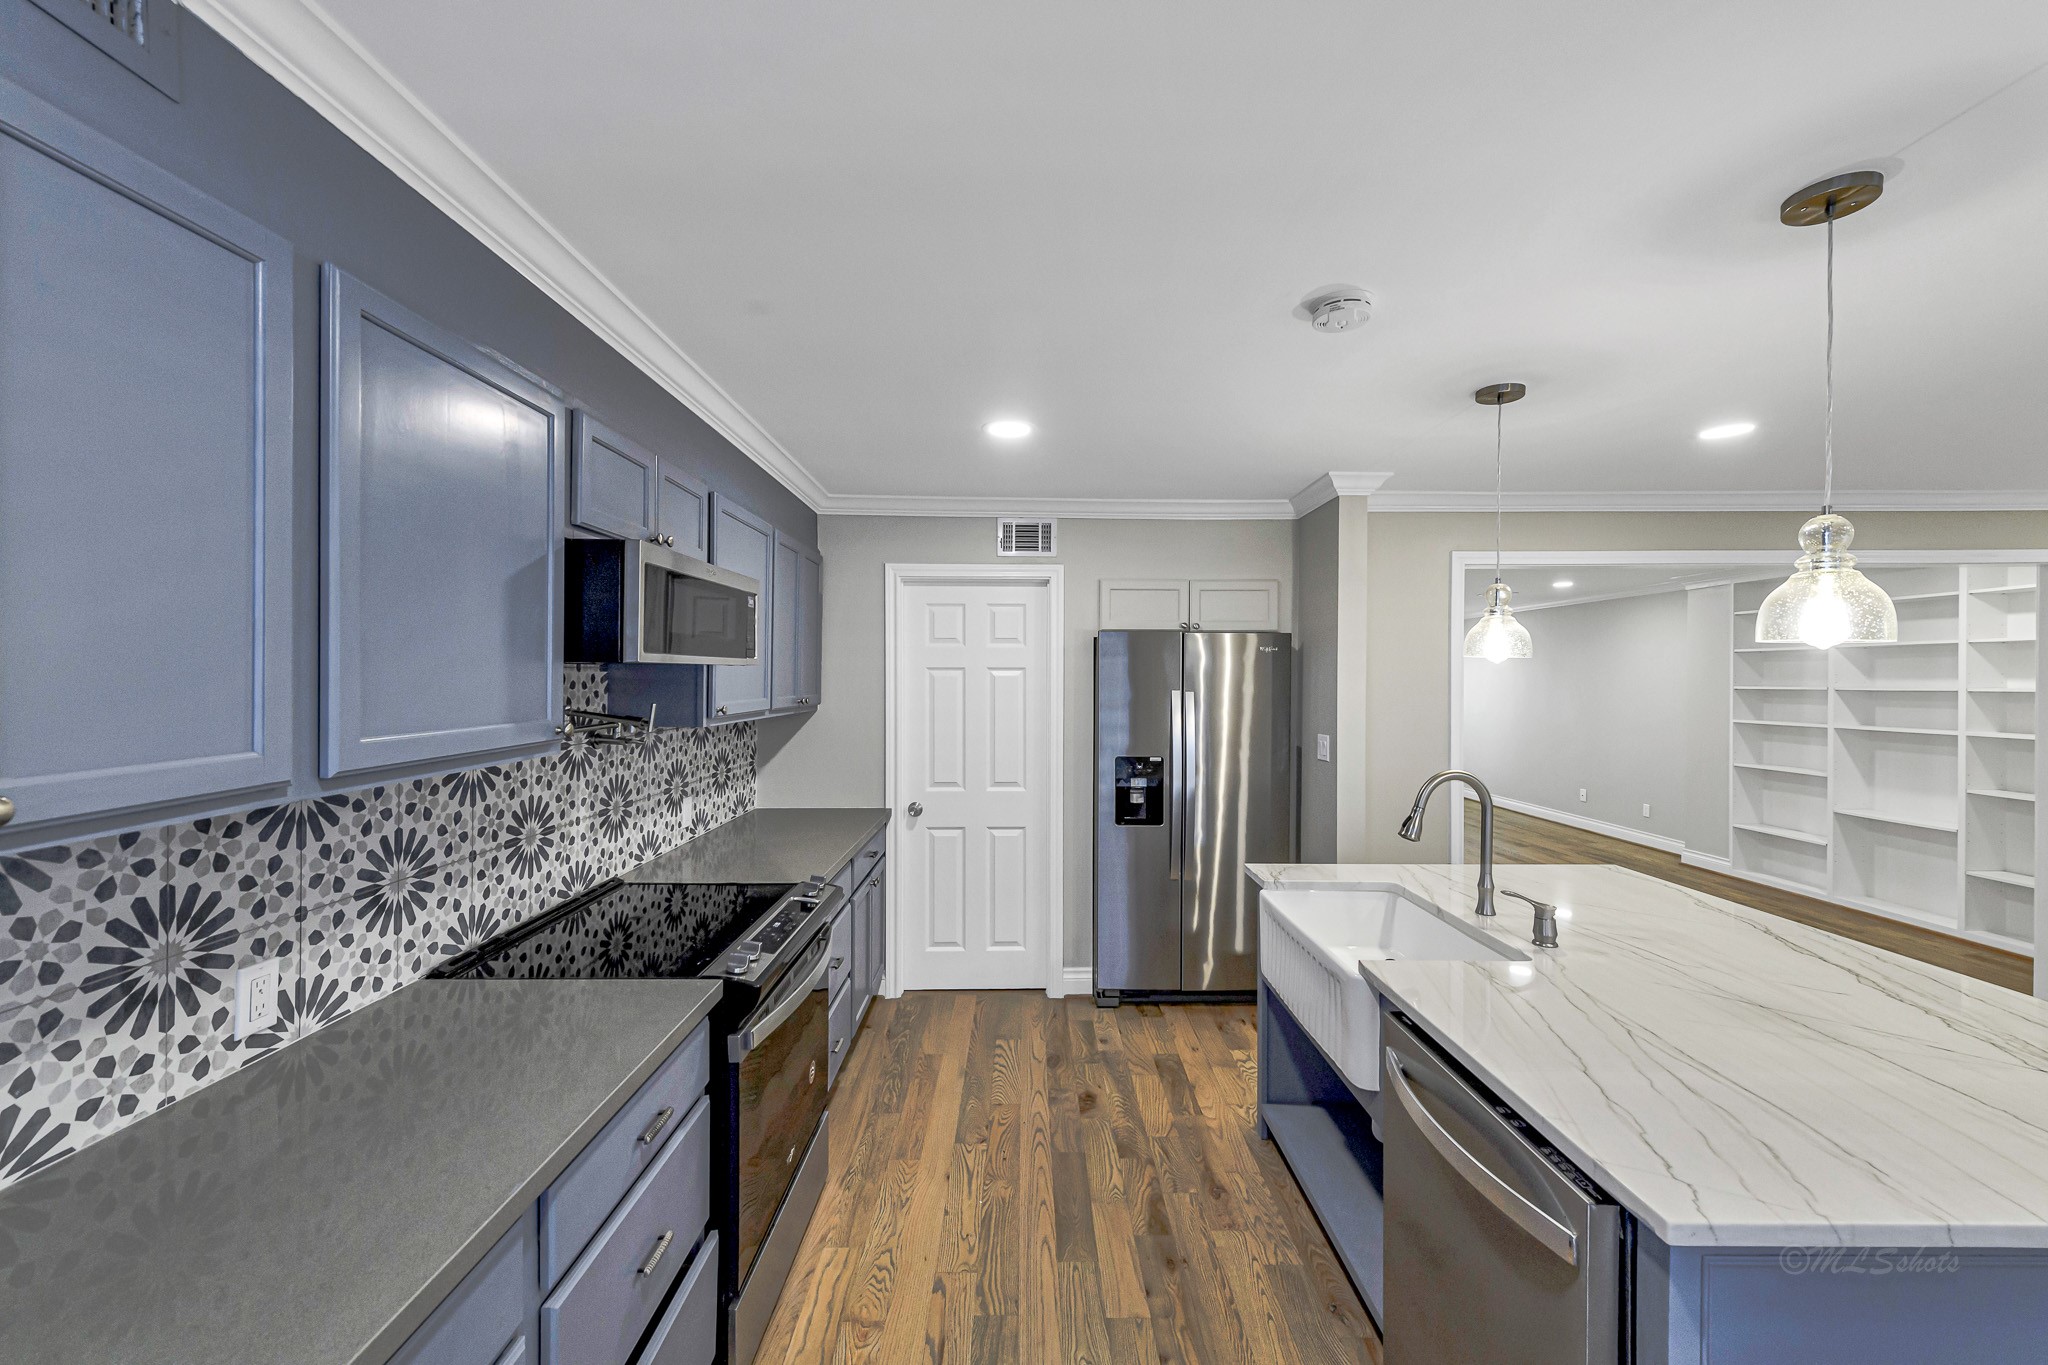 Remarkable quartz countertops - If you have additional questions regarding 4719 Indian Trail  in Baytown or would like to tour the property with us call 800-660-1022 and reference MLS# 84015144.